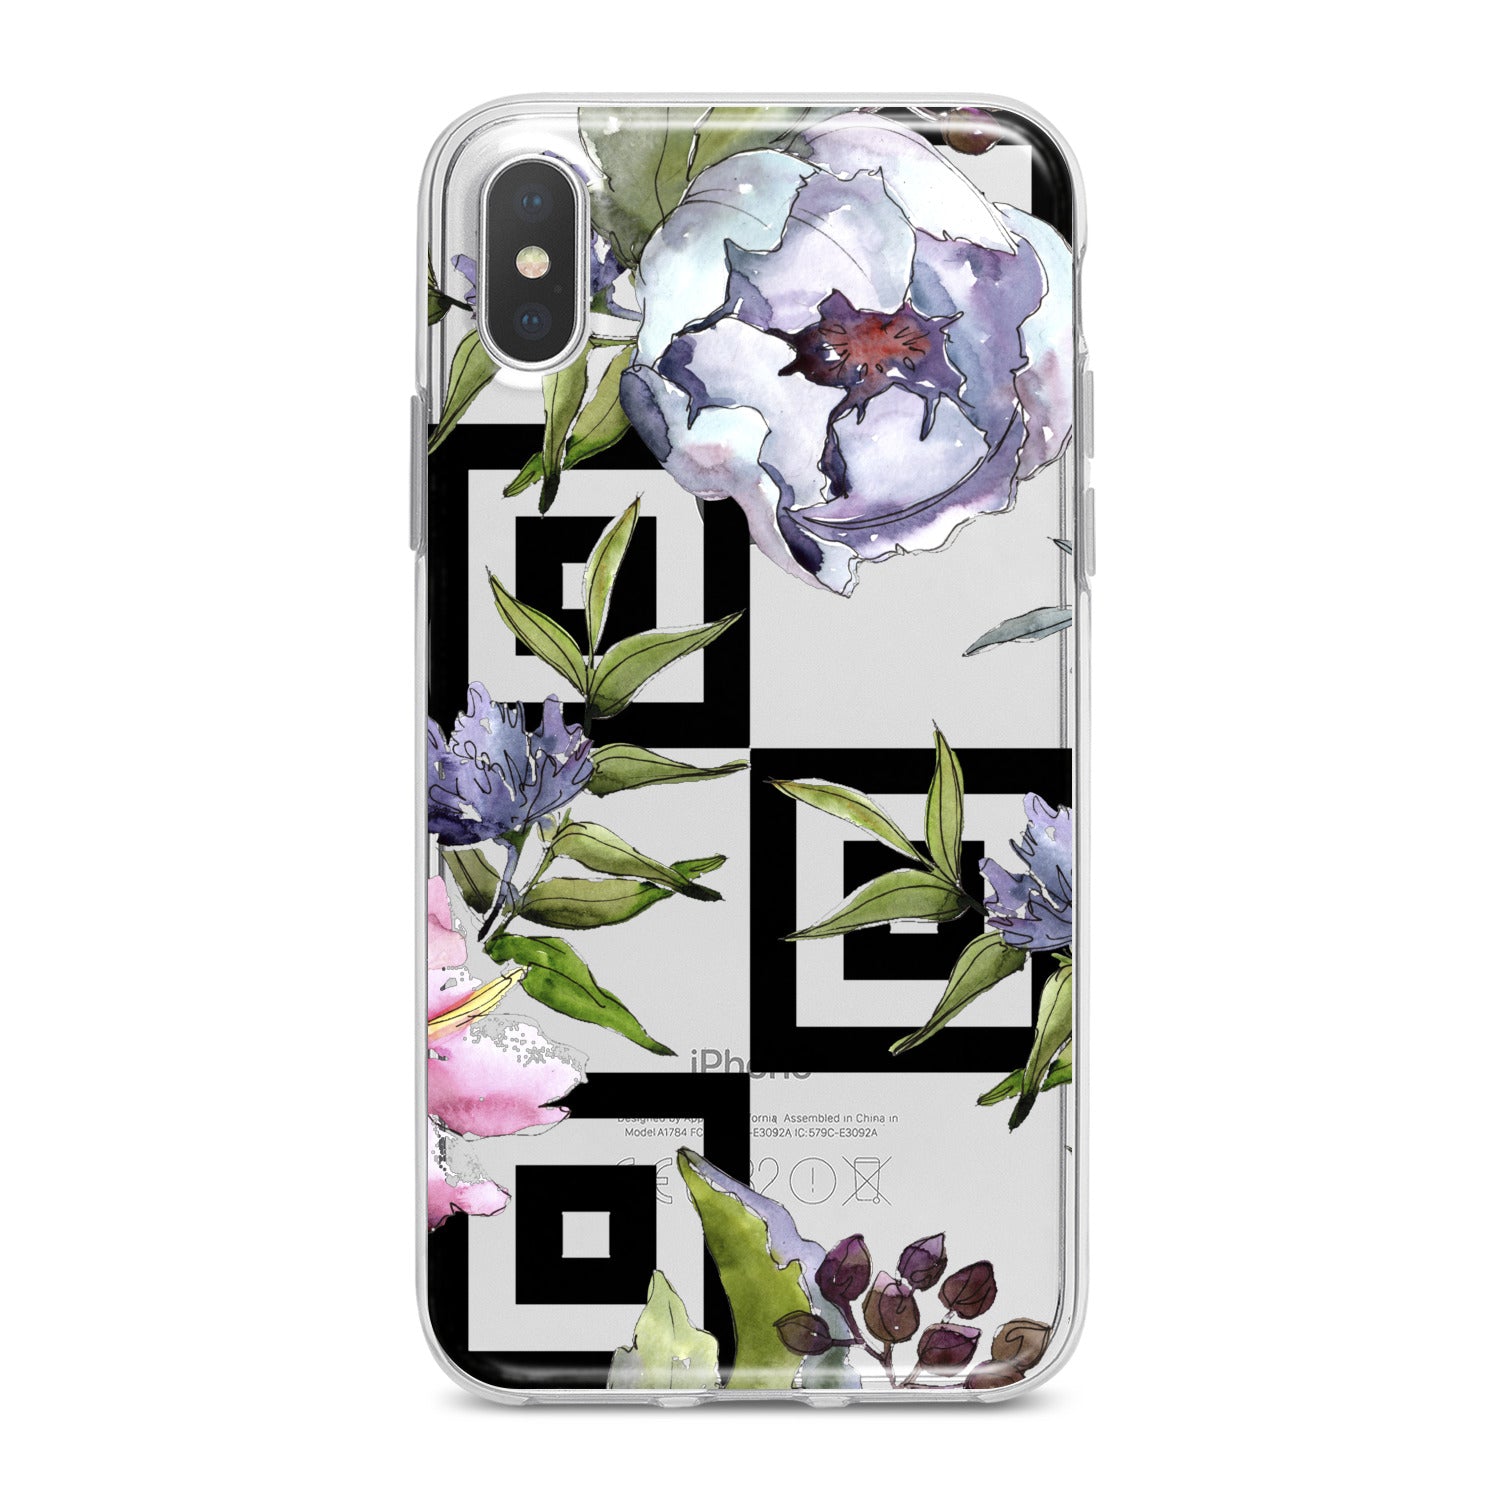 Lex Altern Gentle Peony Phone Case for your iPhone & Android phone.